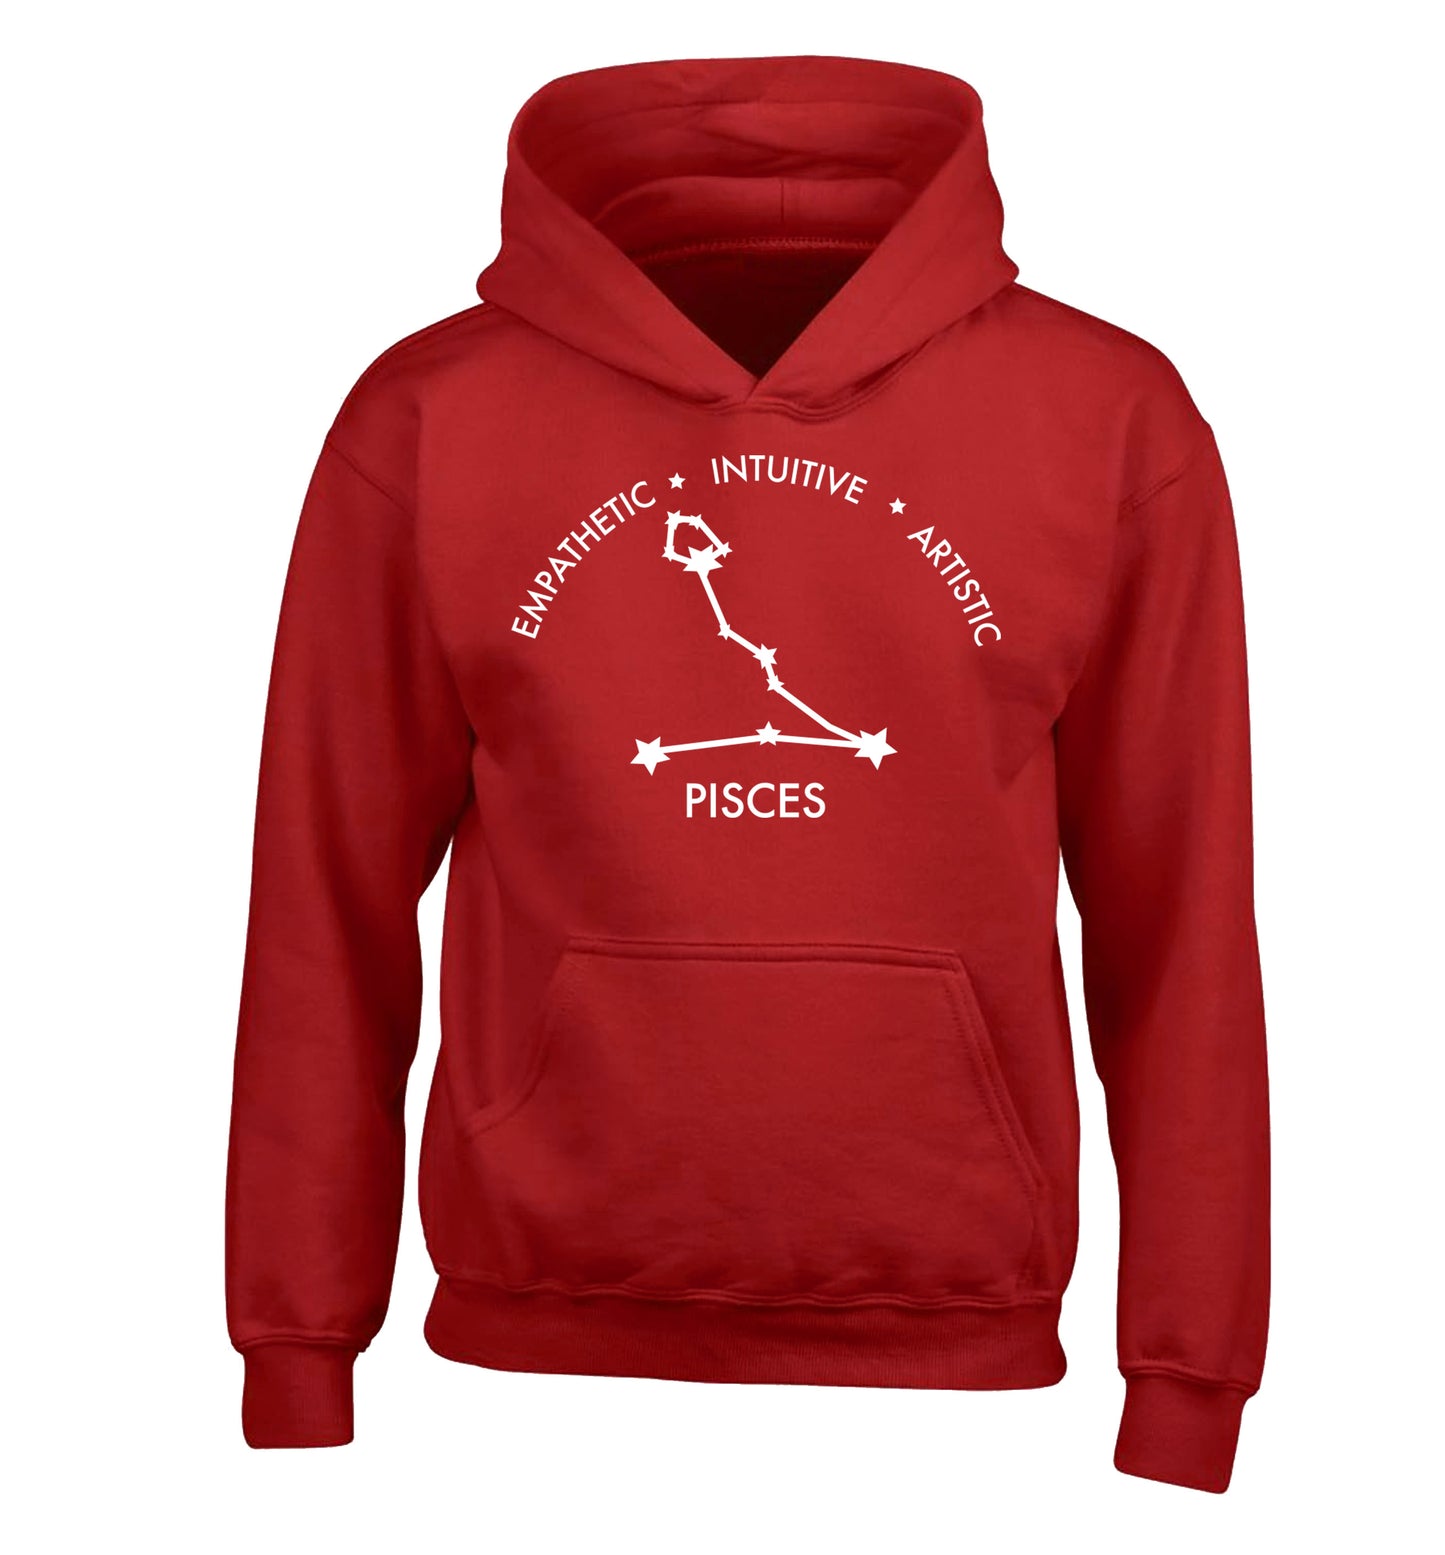 Capricorn: Ambitious | Patient | Gracious children's red hoodie 12-13 Years